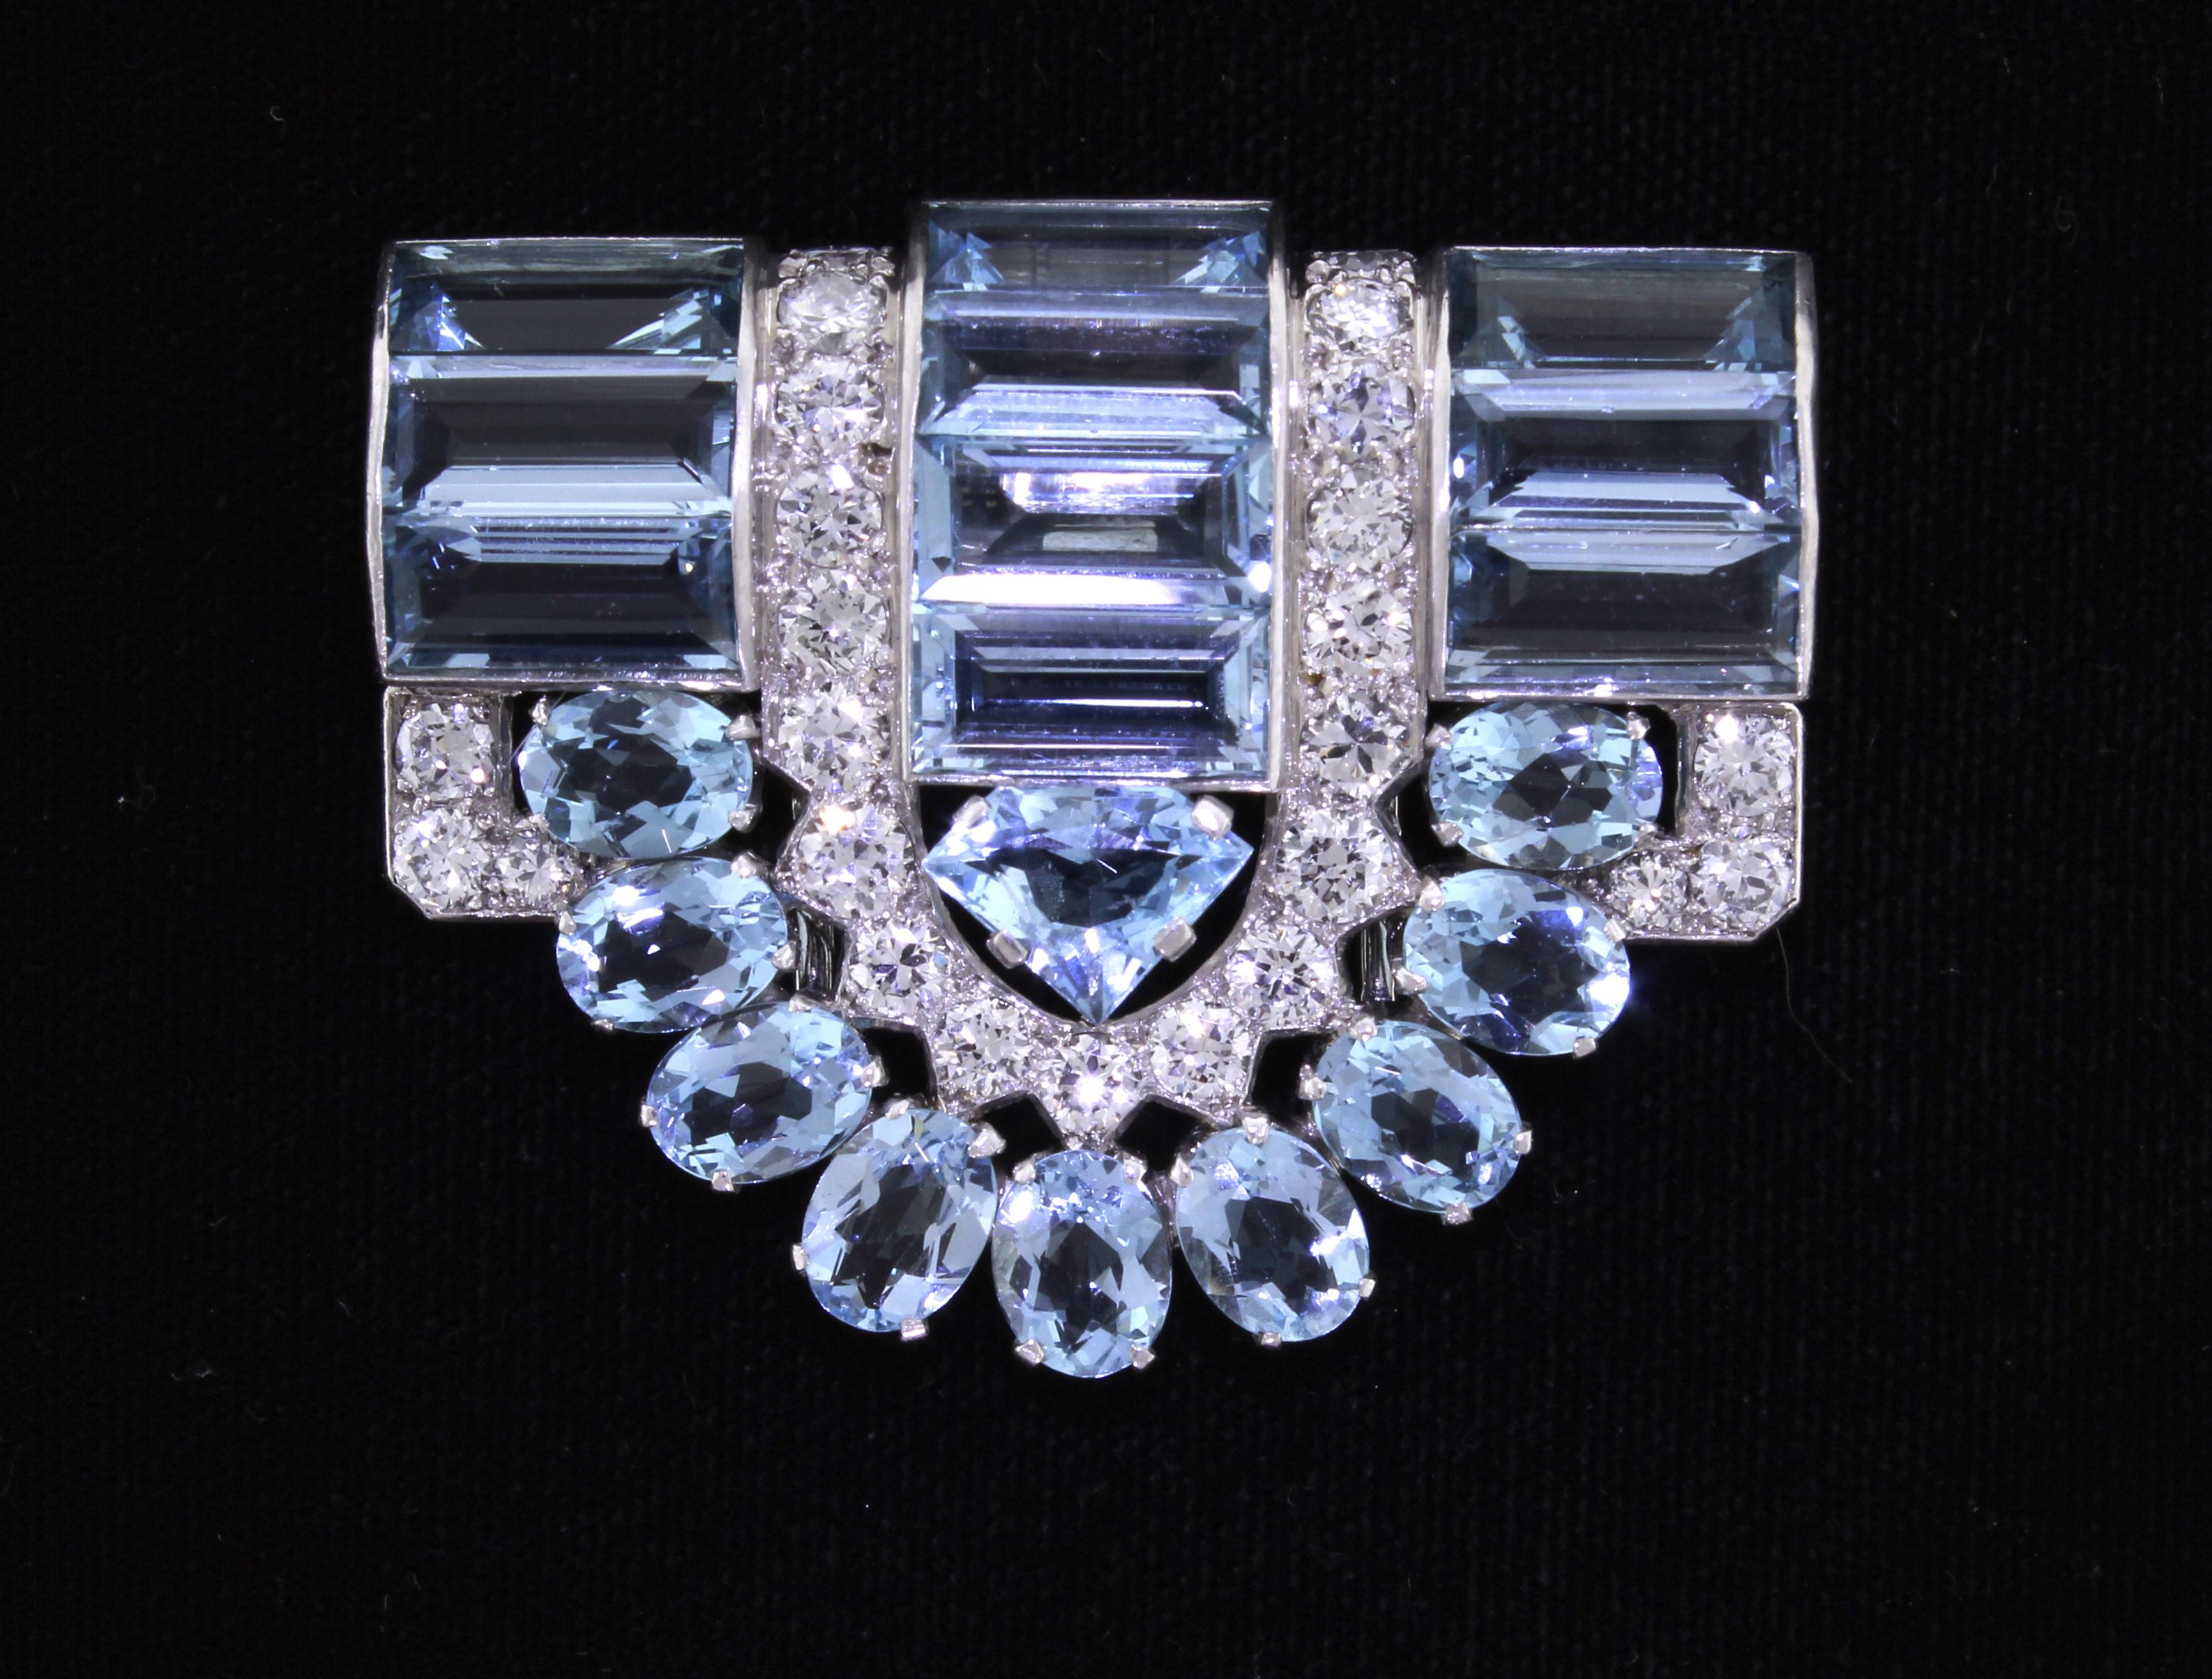 In the 1930s the French jeweler, Louis Cartier designed  the dress clips.  This highly important Aquamarine clip boast 20 oval and 10 baguette aquamarines with 25 diamonds weighing 3.75 carats.  Signed Cartier, London, set in platinum

Princess